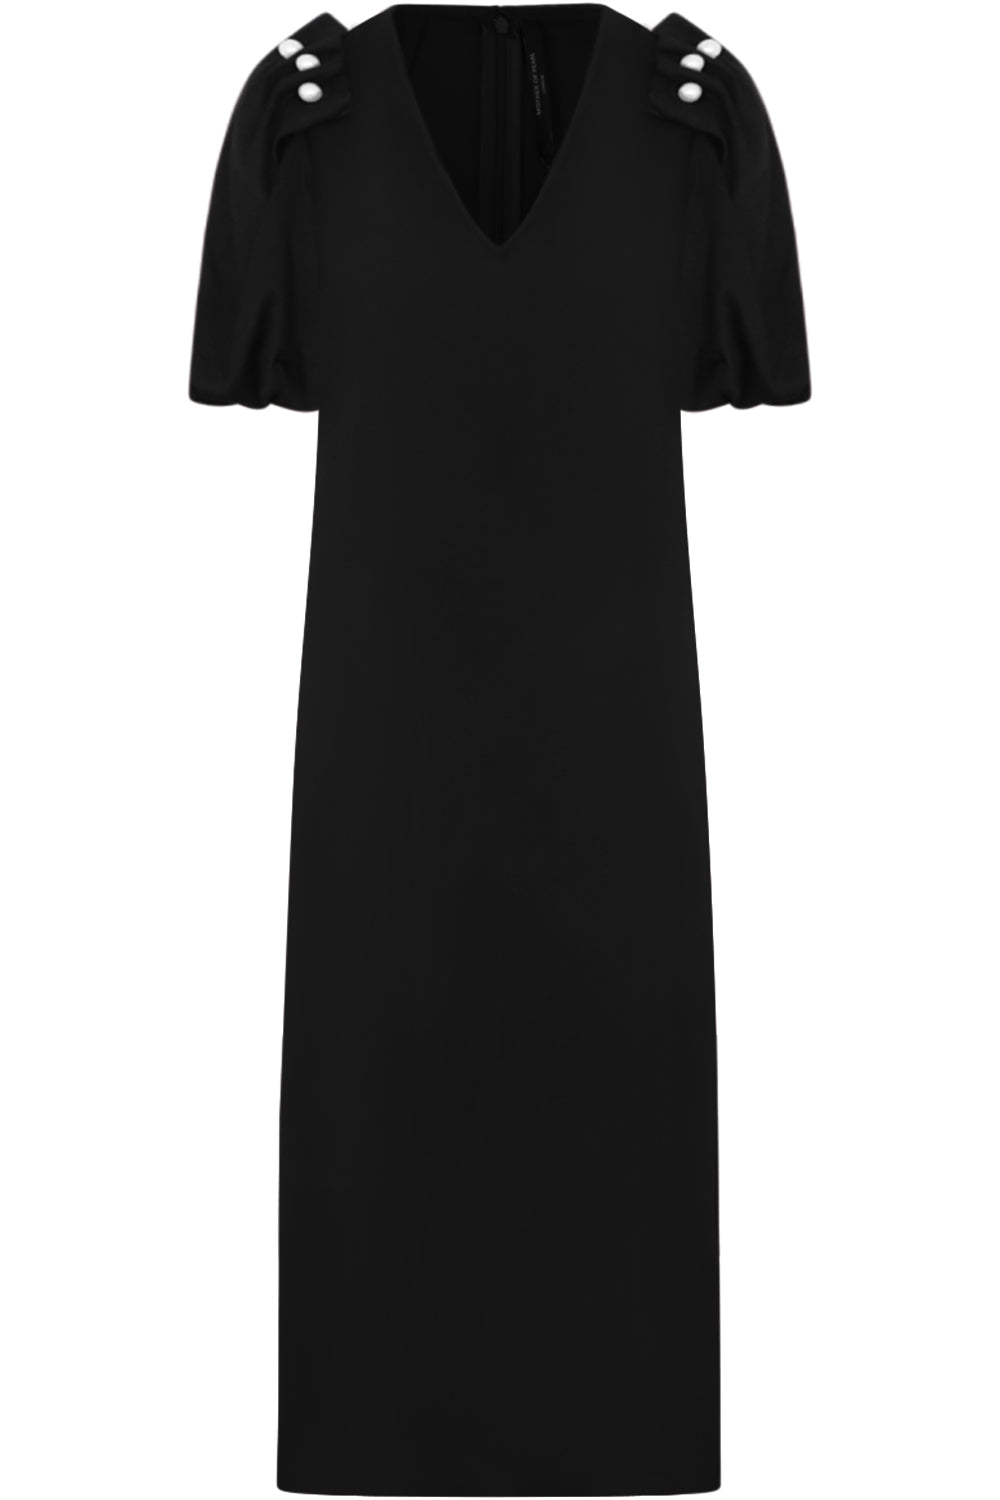 MOTHER OF PEARL RTW LOUELLA  MIDI DRESS WITH PEARL SLEEVE | BLACK